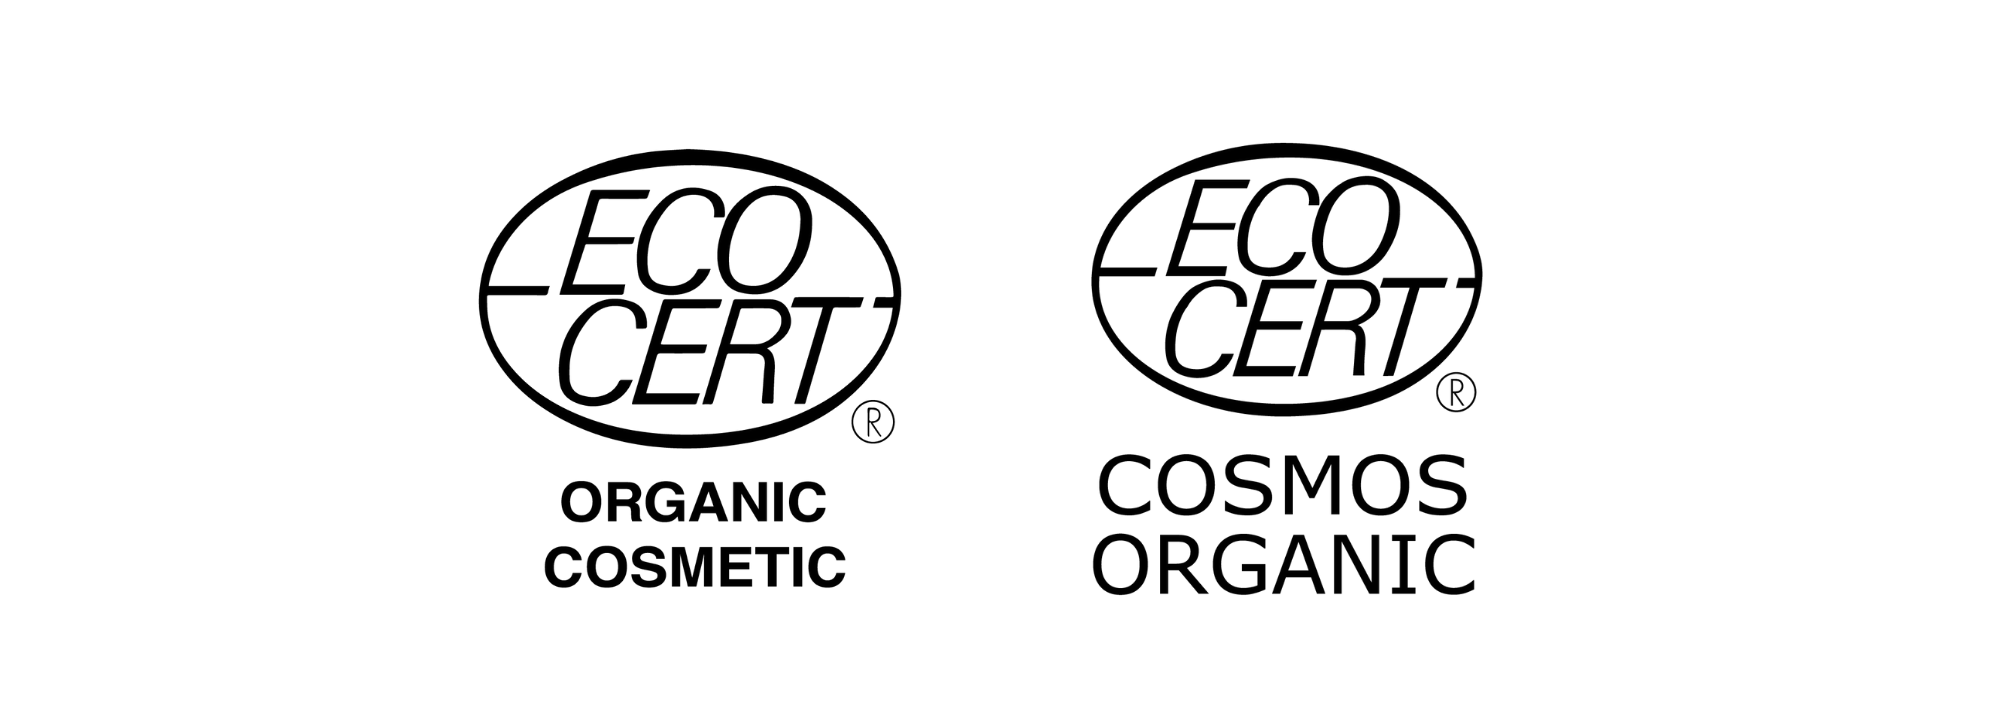 5 Reasons Why You Should Be Using Organic Cosmetics